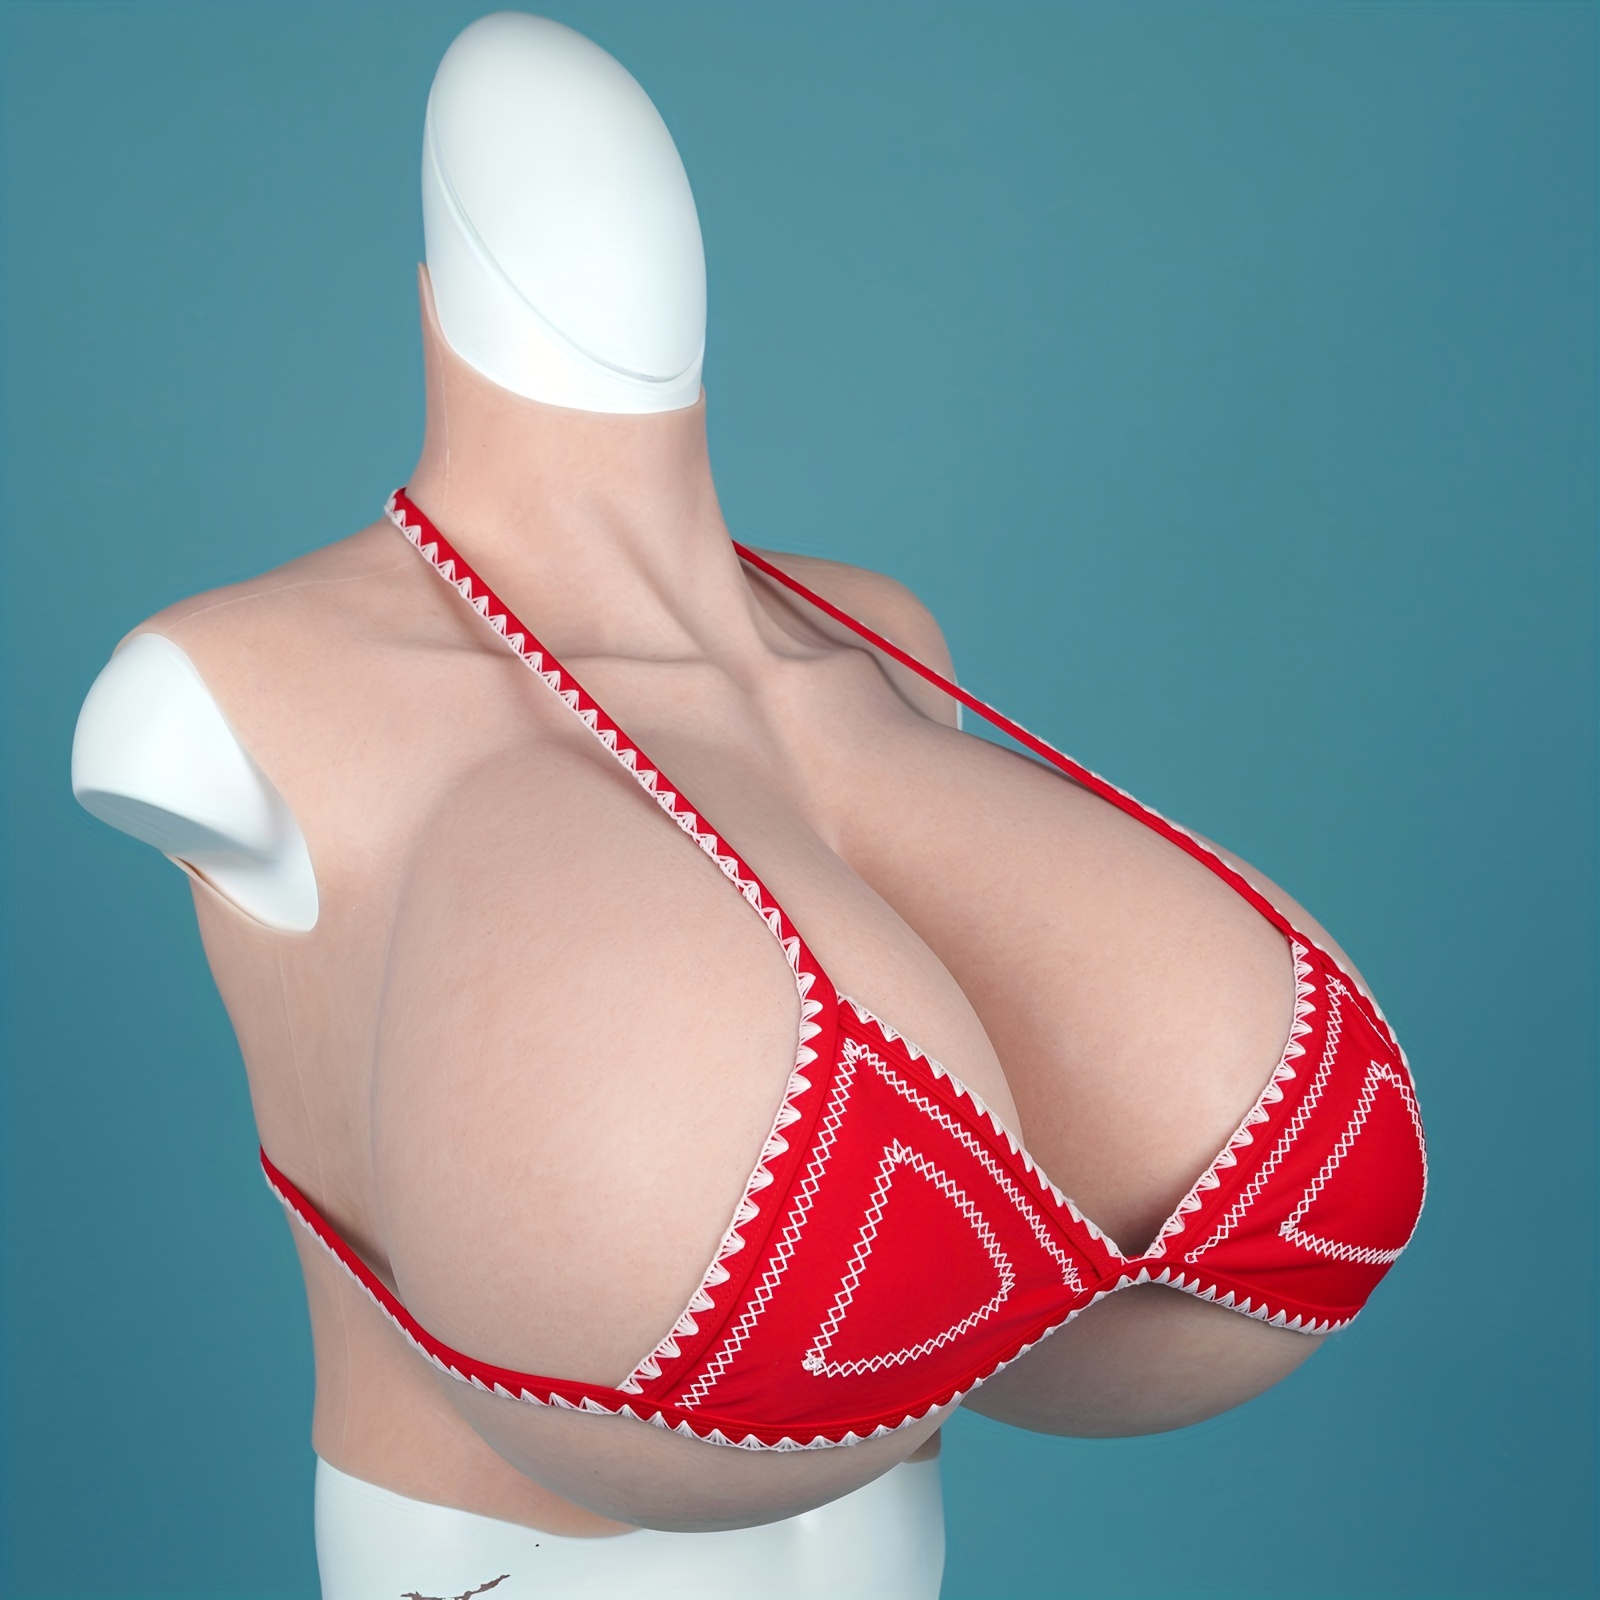 S Cup Breast Forms X Fake Boobs Z Silicone Breastplate Man to